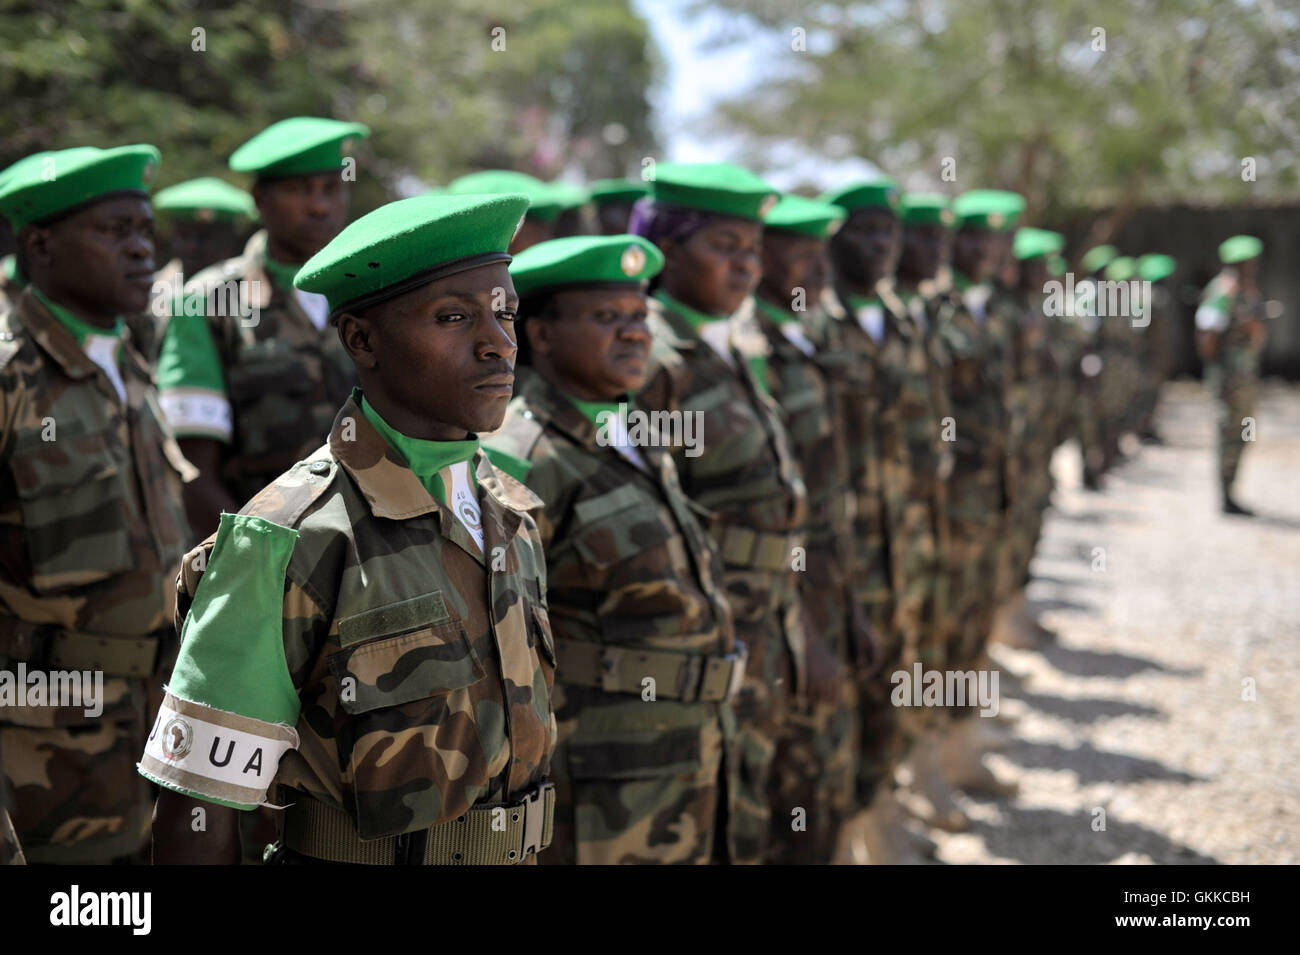 Ugandan soldiers belonging to the African Union Mission in Somalia look on during a ceremony in Baidoa, Somalia, to welcome Ethiopia into the African Union peace keeping mission on January 22. AU UN IST PHOTO / Tobin Jones Stock Photo